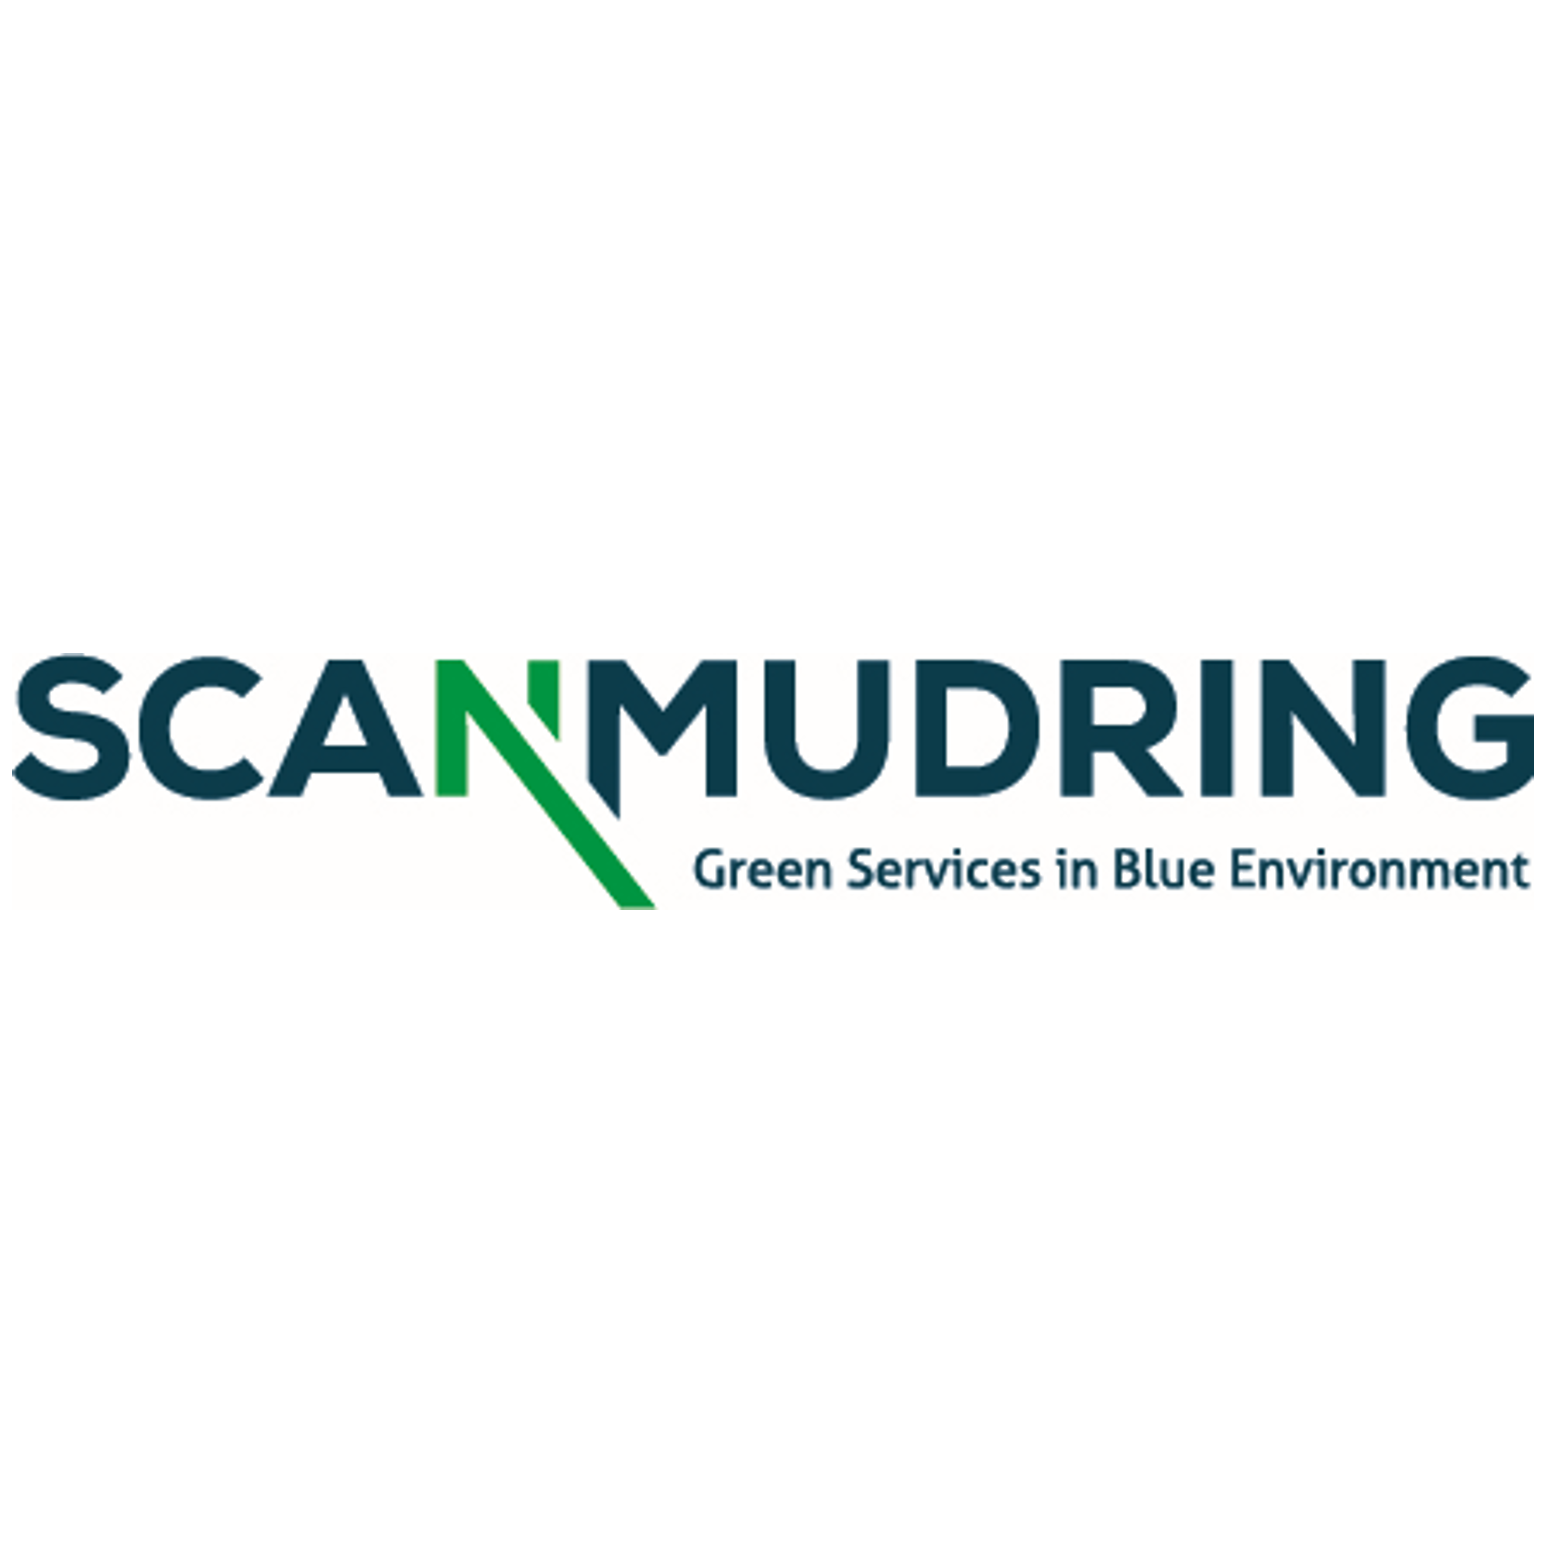 https://decommission.net/wp-content/uploads/formidable/3/Scanmudring-square-1-150x150.png logo